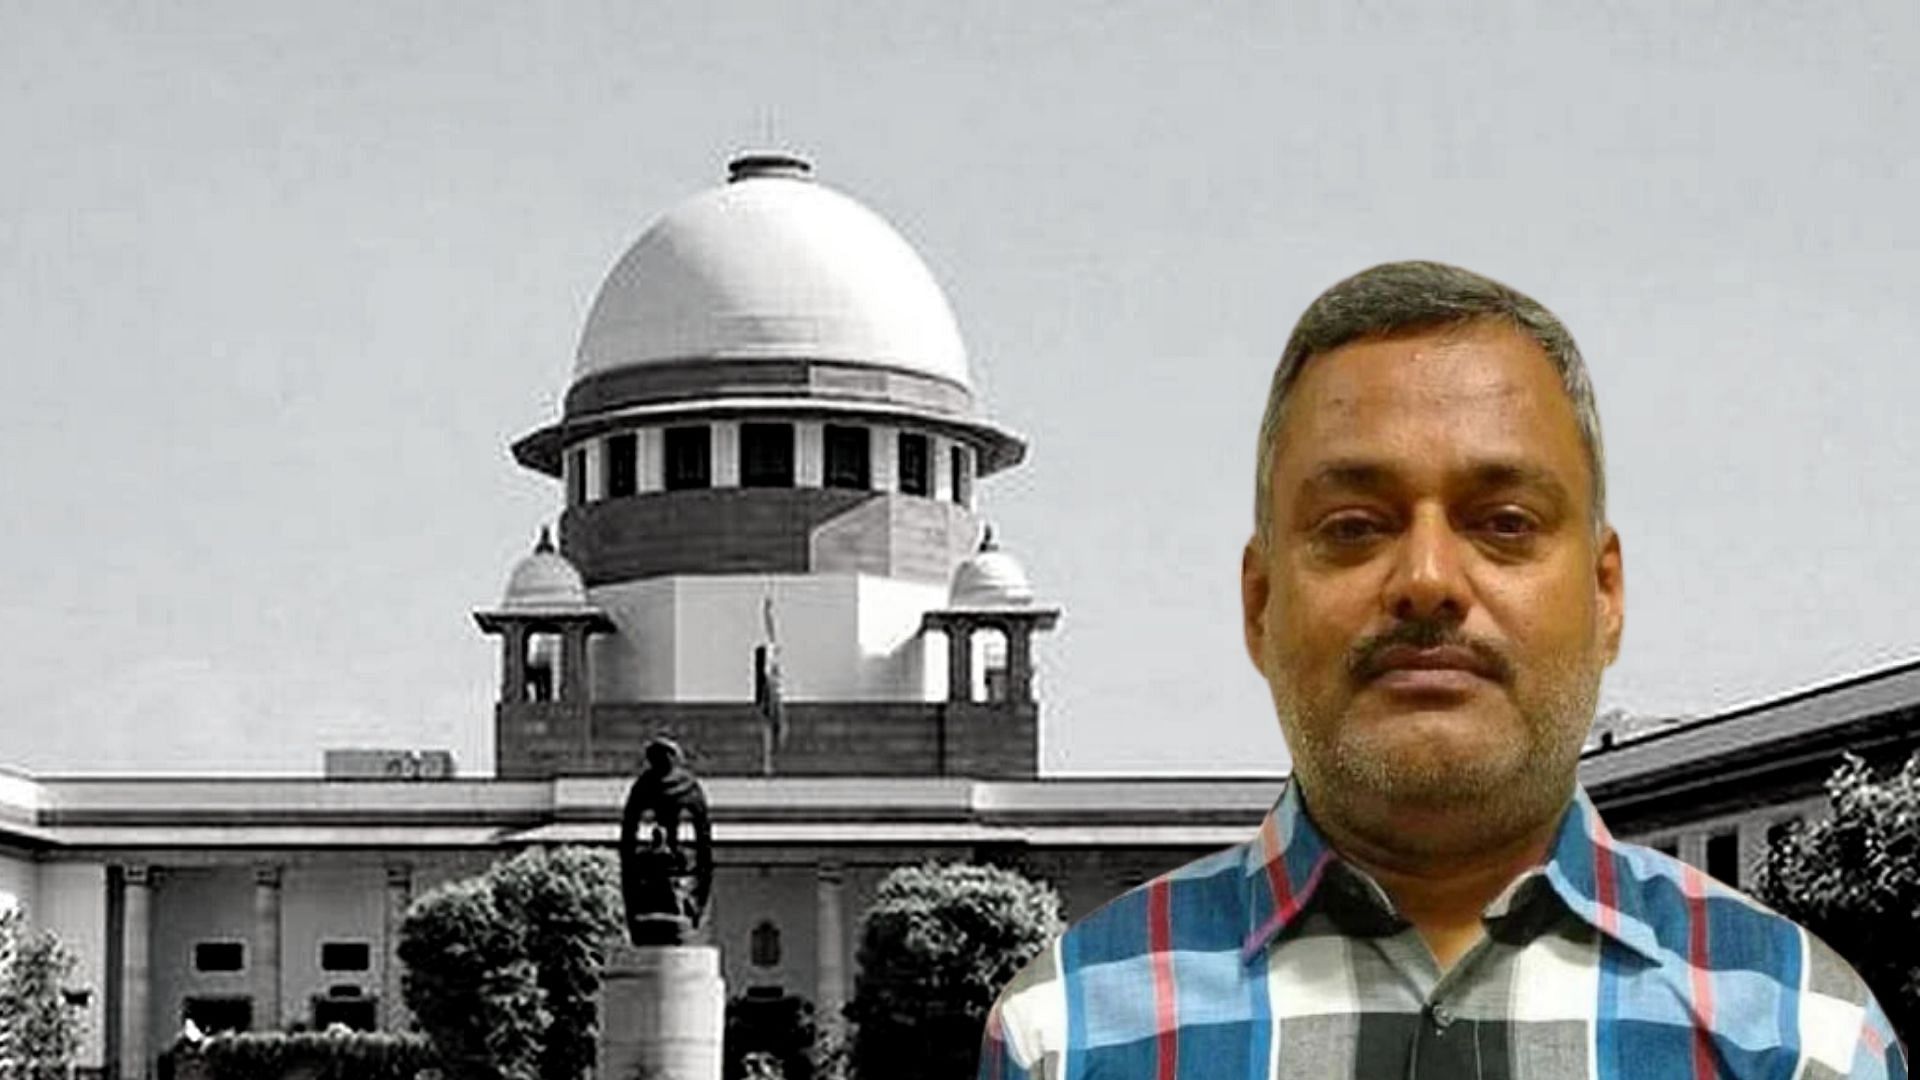 The petition also sought a SC-monitored probe by the Central Bureau of Investigation into the killing of the five of Dubey’s aides and the demolition of his home since 3 July, <a href="https://www.ndtv.com/india-news/petition-in-supreme-court-yesterday-feared-vikas-dubey-encounter-killing-2260274?pfrom=home-topstories">NDTV </a>reported.